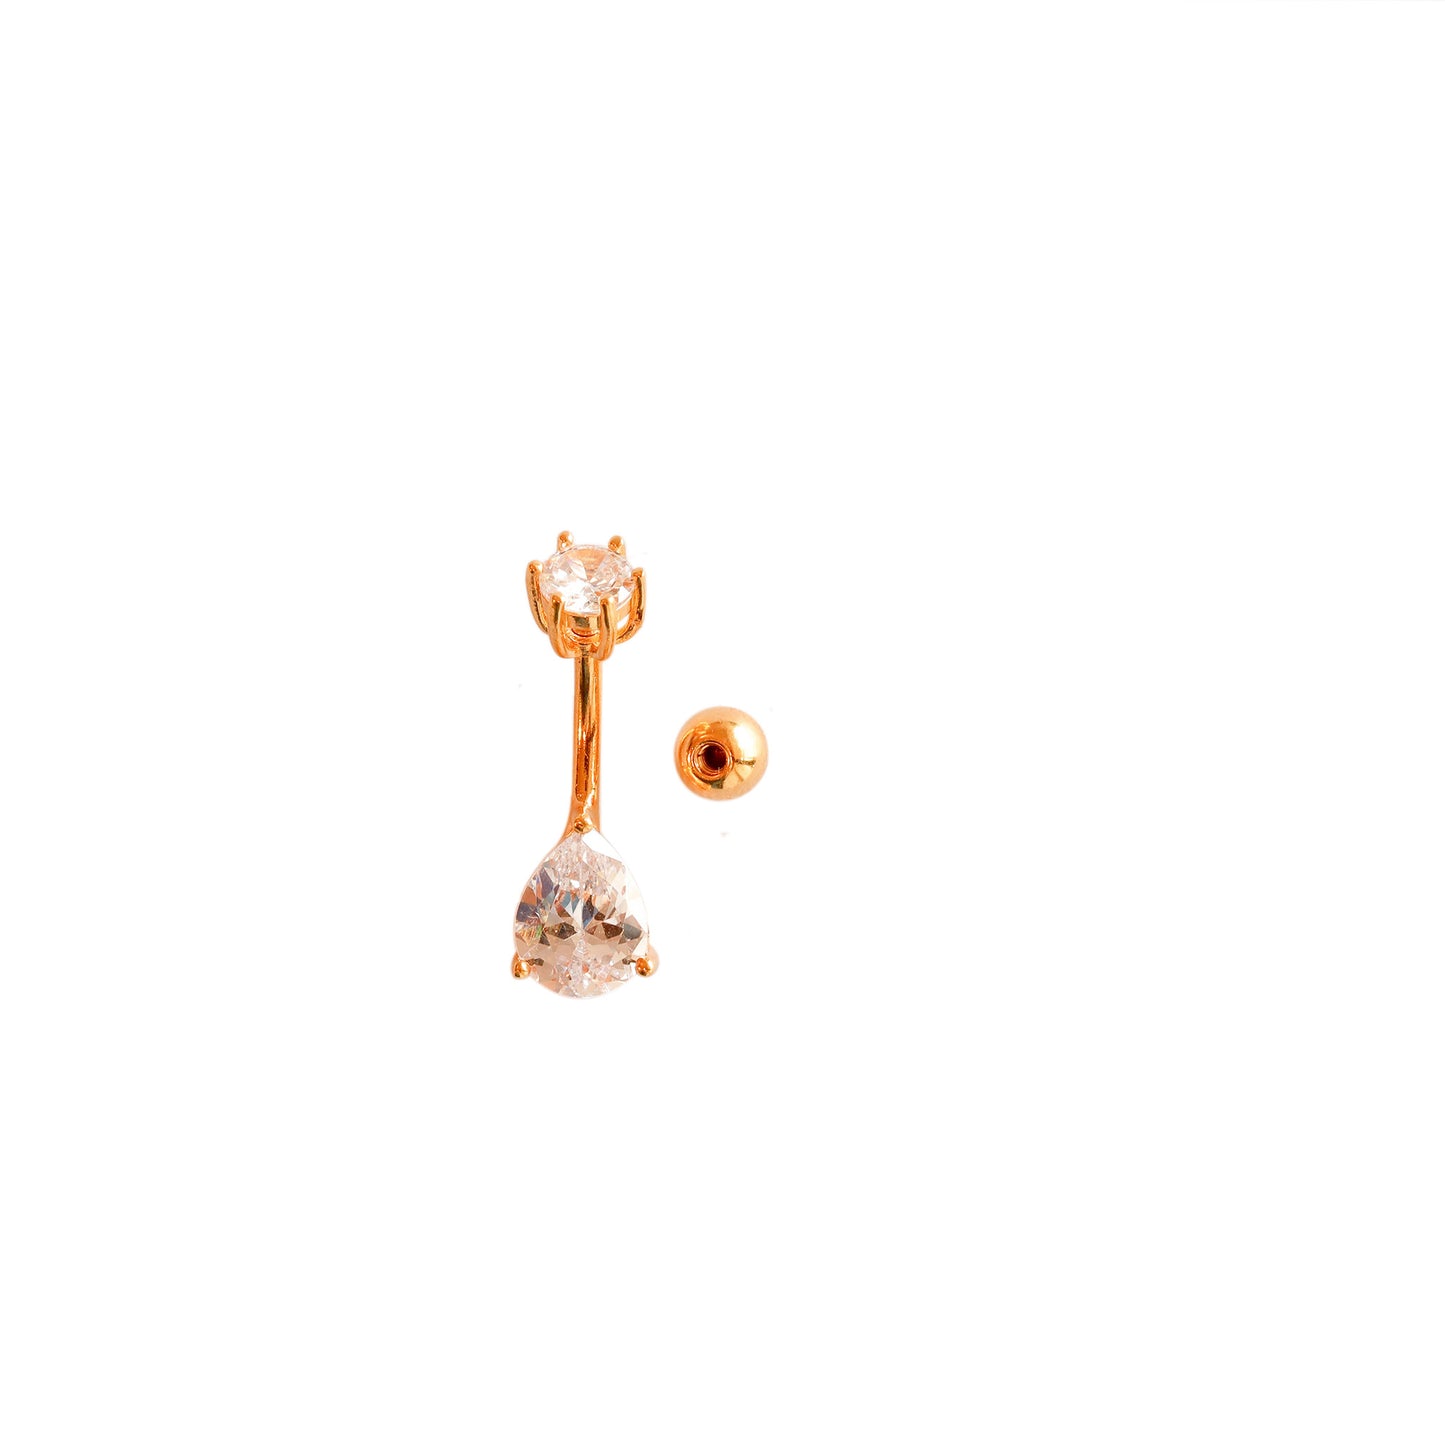 Vermeil | 24k Gold Coated 925 Silver Dainty Crystal Teardrop Belly Ring | 6mm 1/4" 8mm 5/16" 10mm 3/8" - Sturdy South